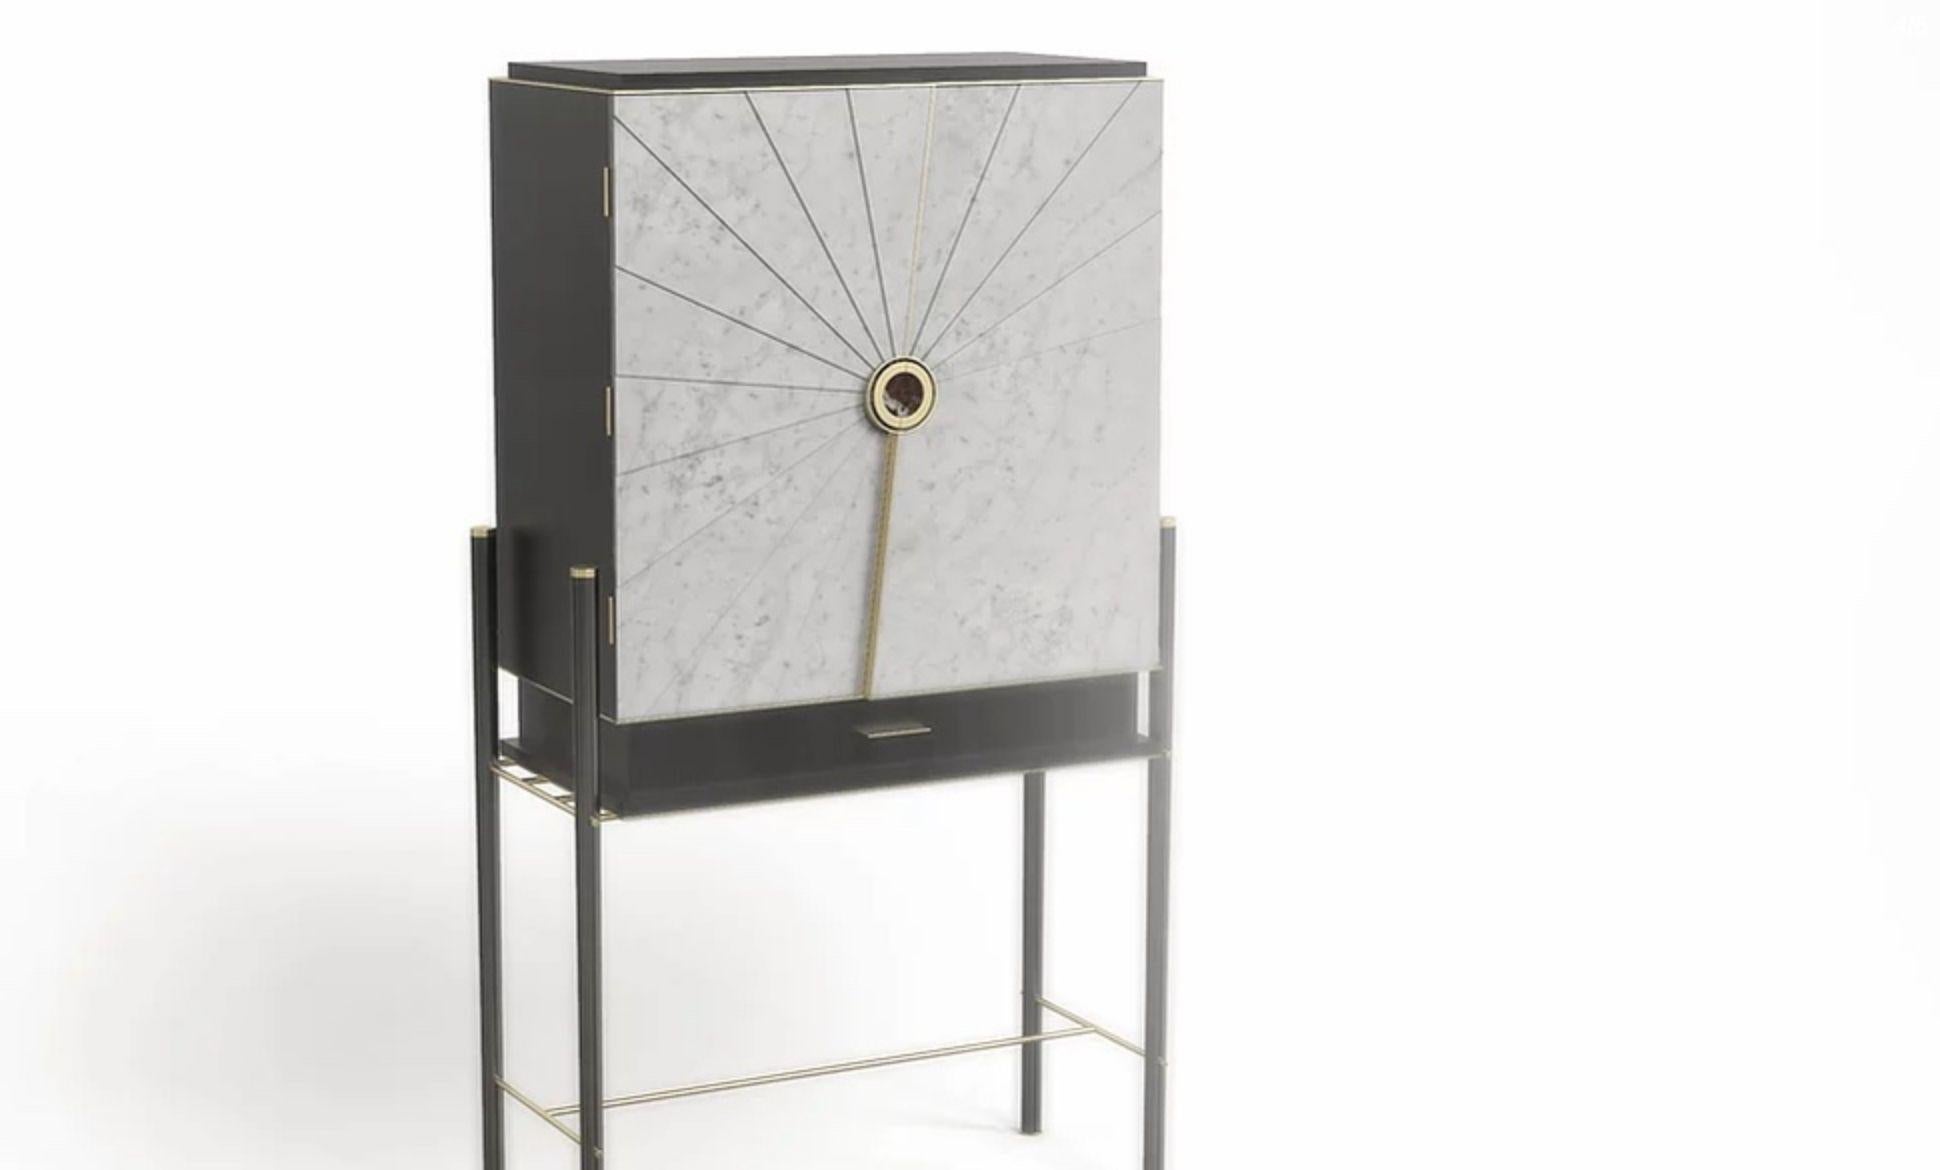 Vertigo cabinet by Marmi Serafini
Materials: Carrara C, Rosso Lepanto, Metal
Dimensions: 89 x 42 x 160 cm

Vertigo is a detail oriented cabinet. The marble covering on the doors of the cabinet is shaped in such a way to create an hypnotic effect